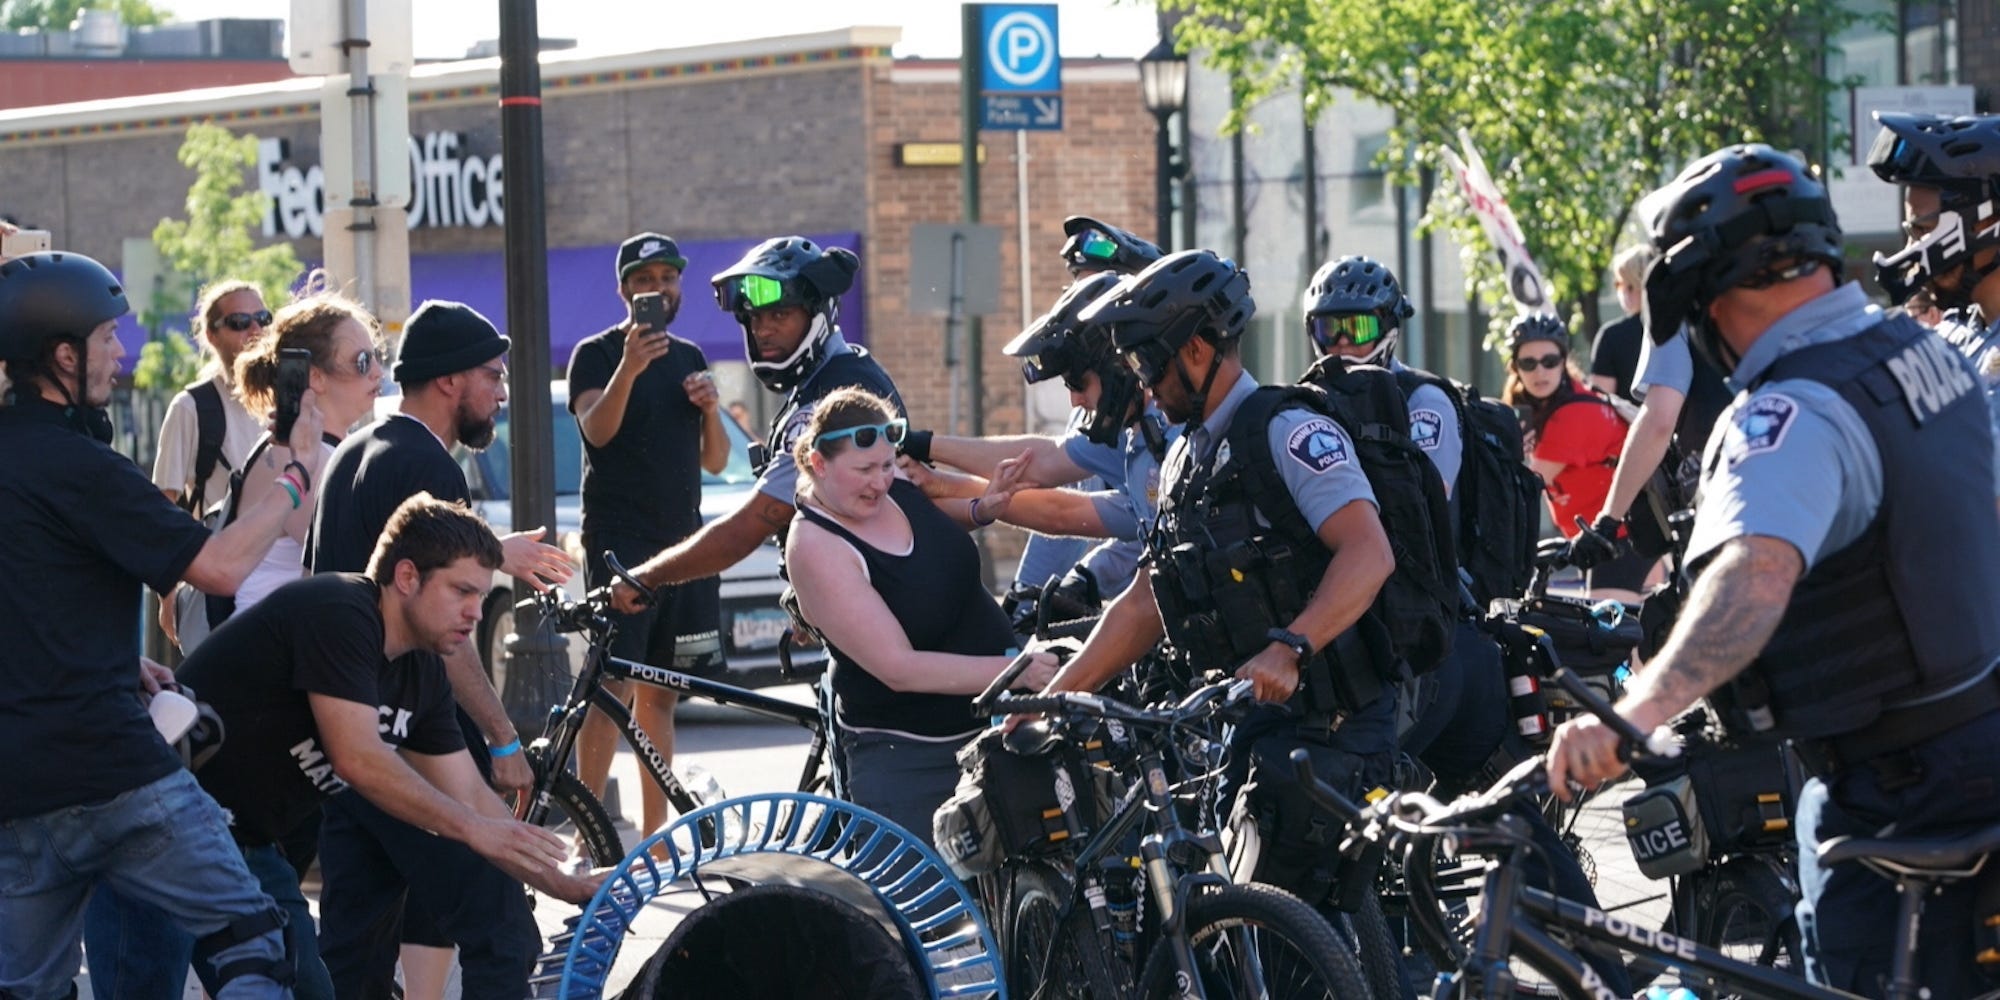 A small group of protesters who had closed the intersection of Hennepin Avenue and Lake Street in Uptown clashed with officers on bike who were trying to take over the area as protests continue in response the the shooting of Winston Smith the day before by police in Minneapolis, Minn., on June 4, 2021.